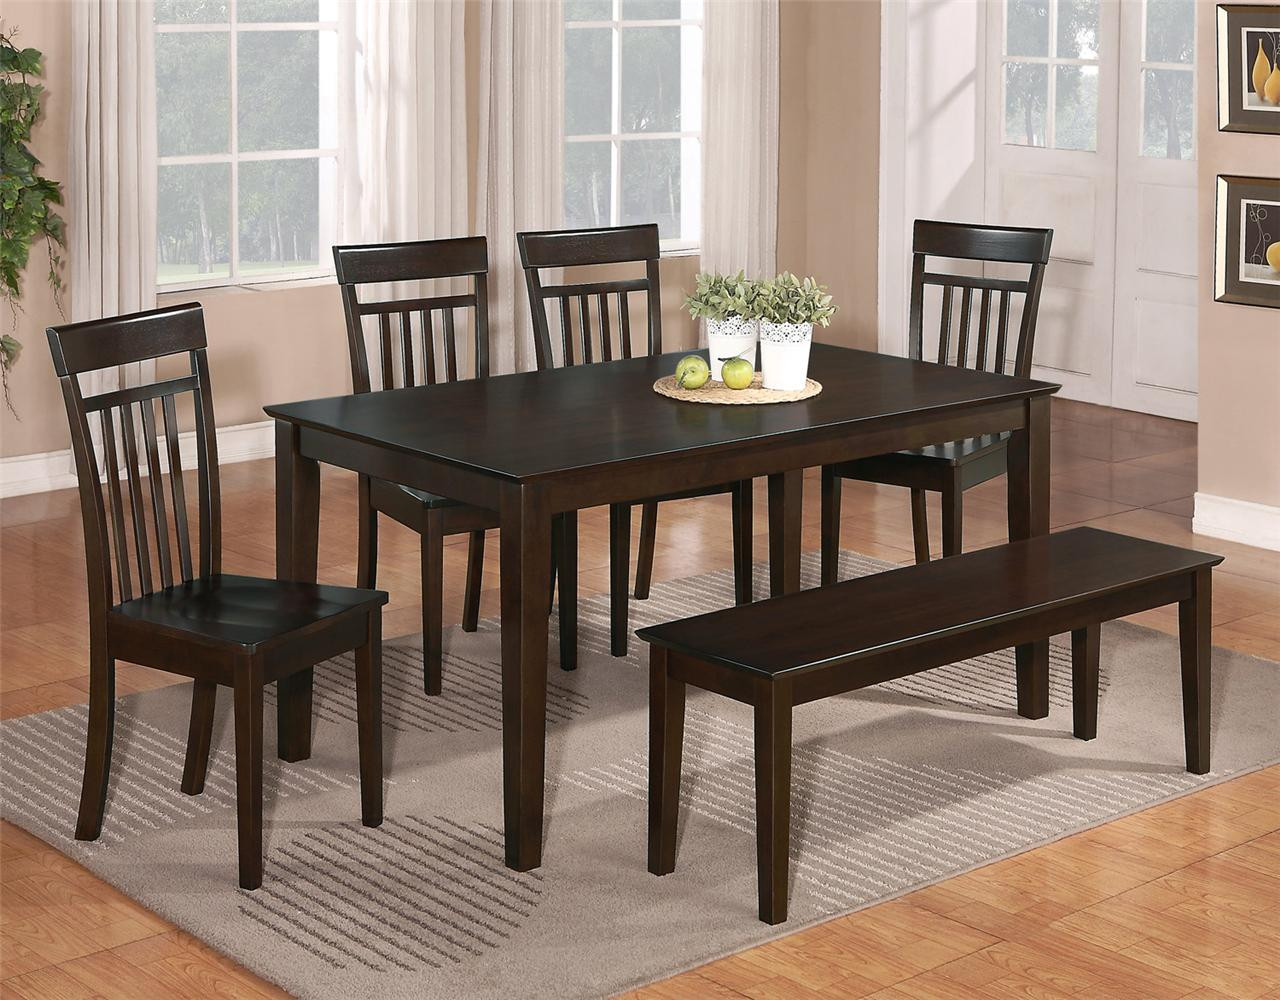 Small Wood Kitchen Table
 6 PC DINETTE KITCHEN DINING ROOM SET TABLE w 4 WOOD CHAIR